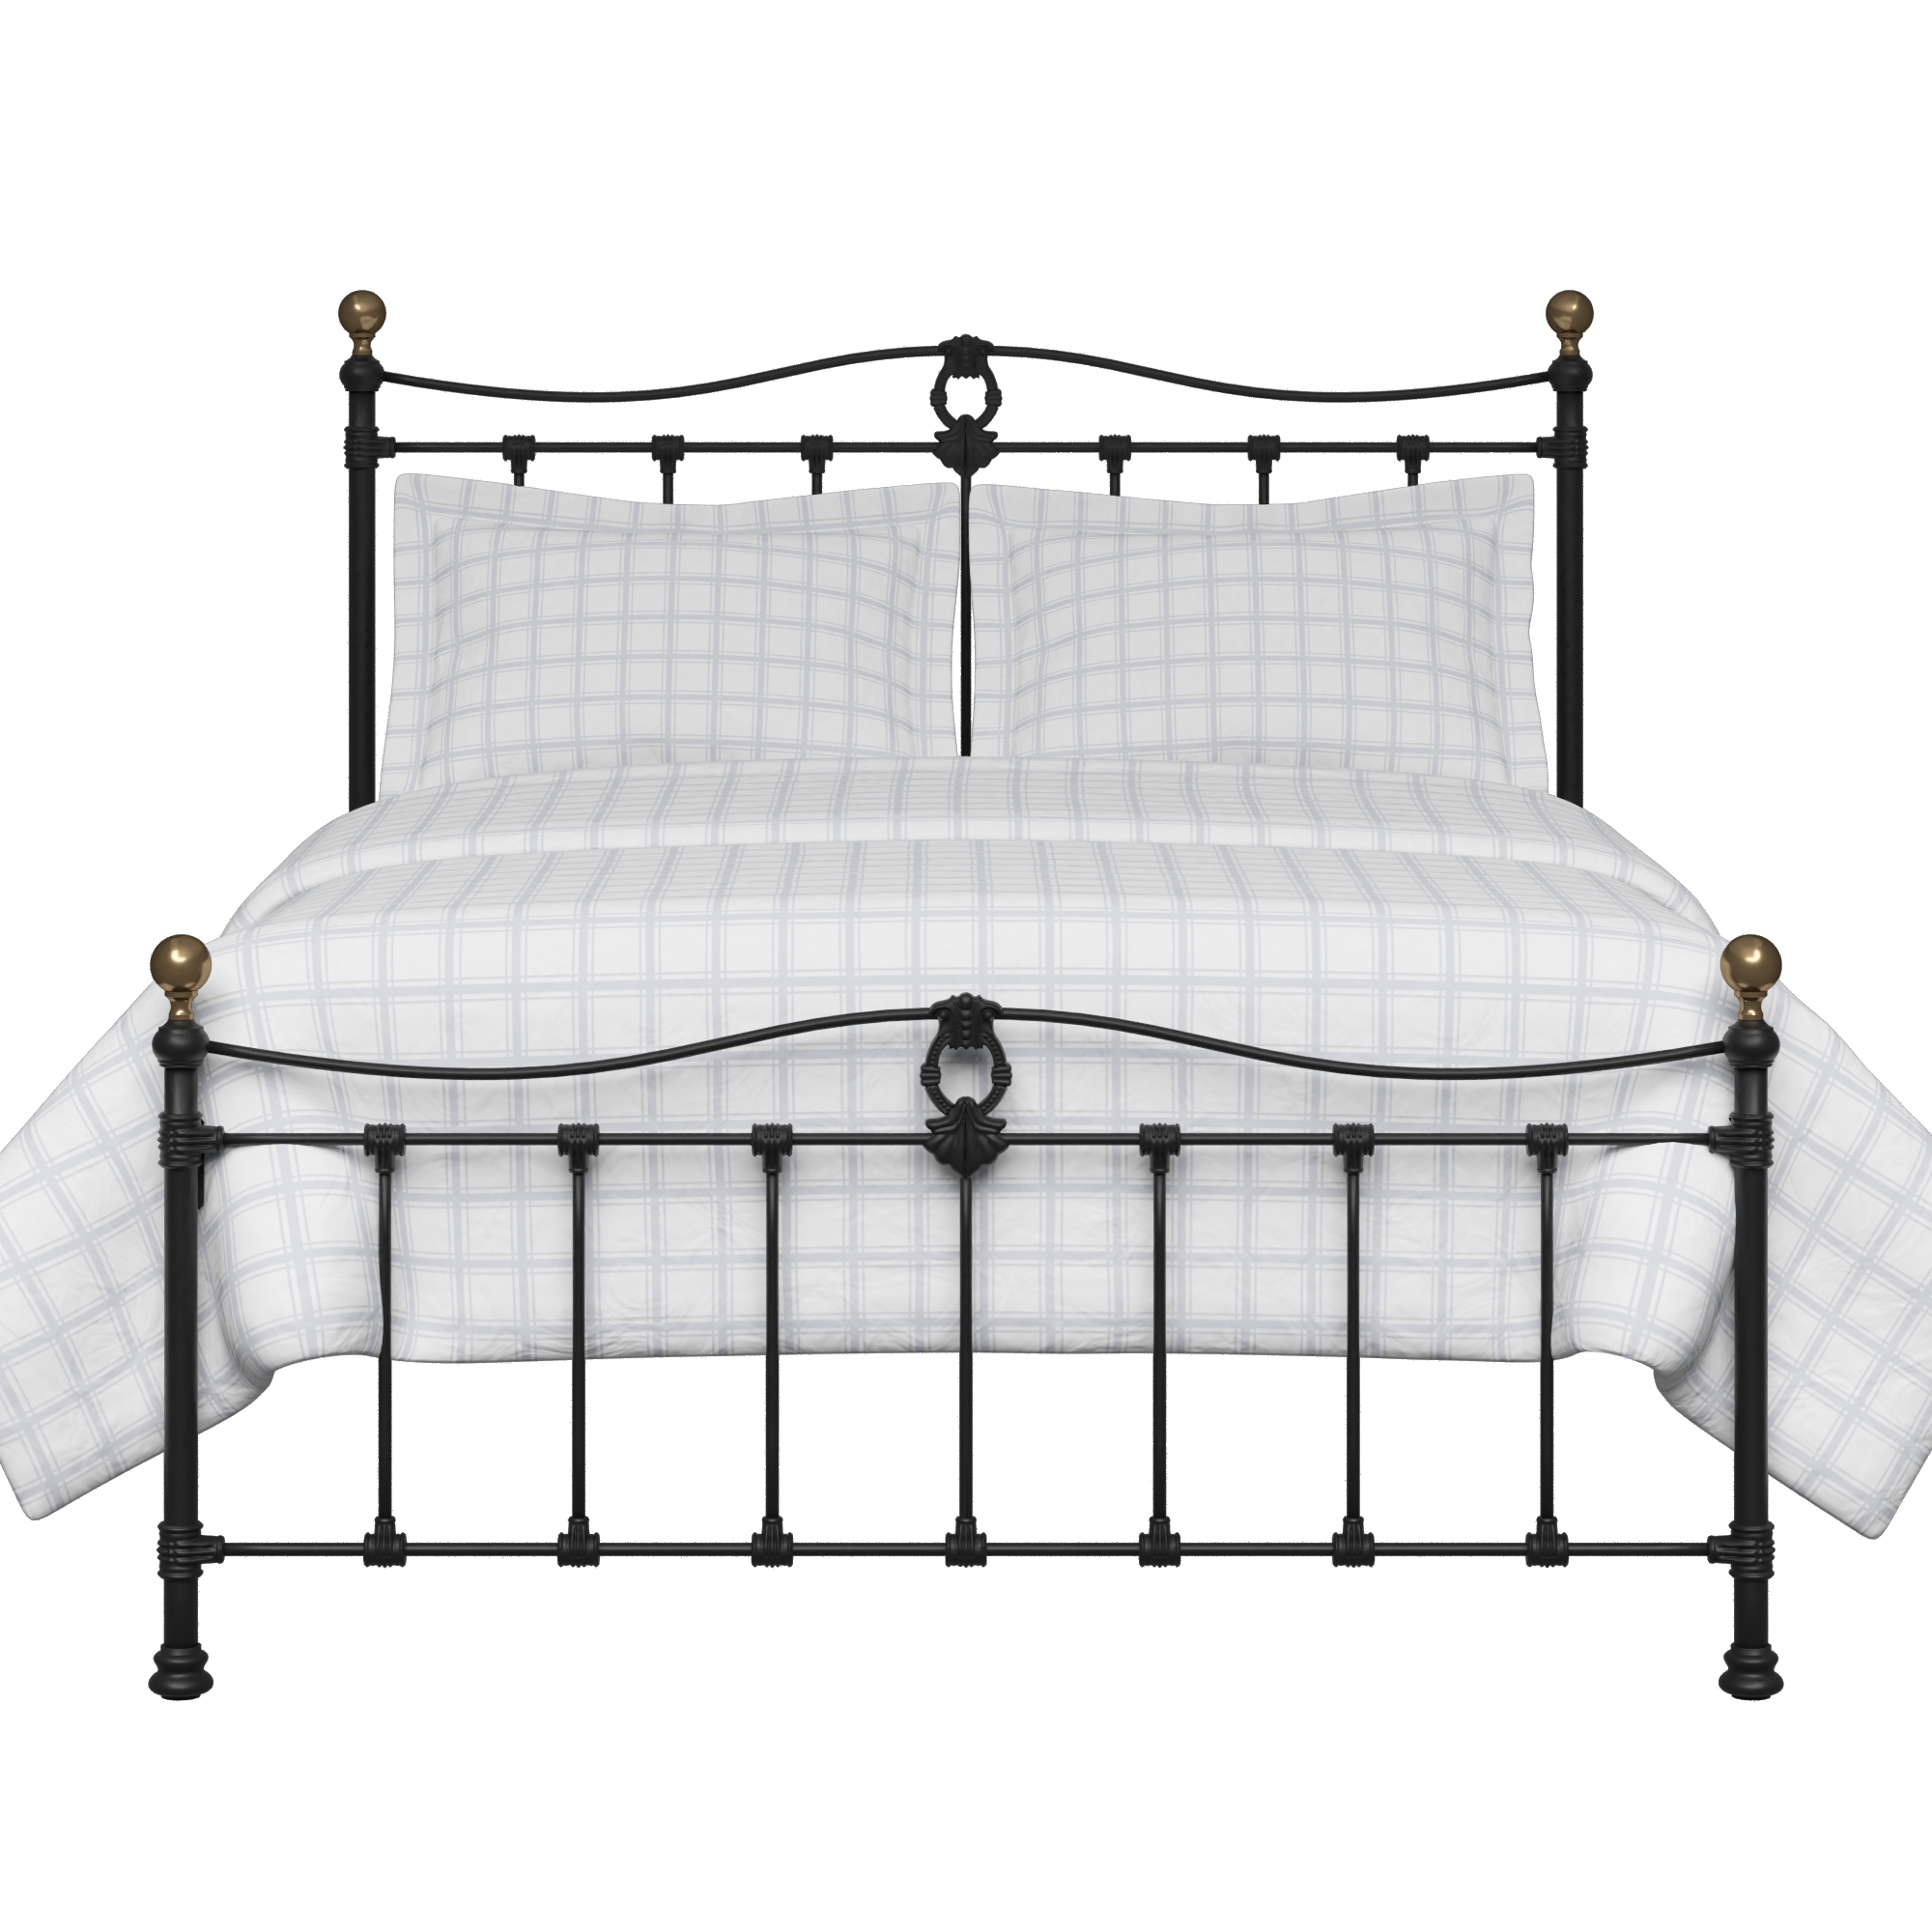 Tulsk Low Footend Iron Metal Bed, 39 X 80 Bed Frame Dimensions In Feet